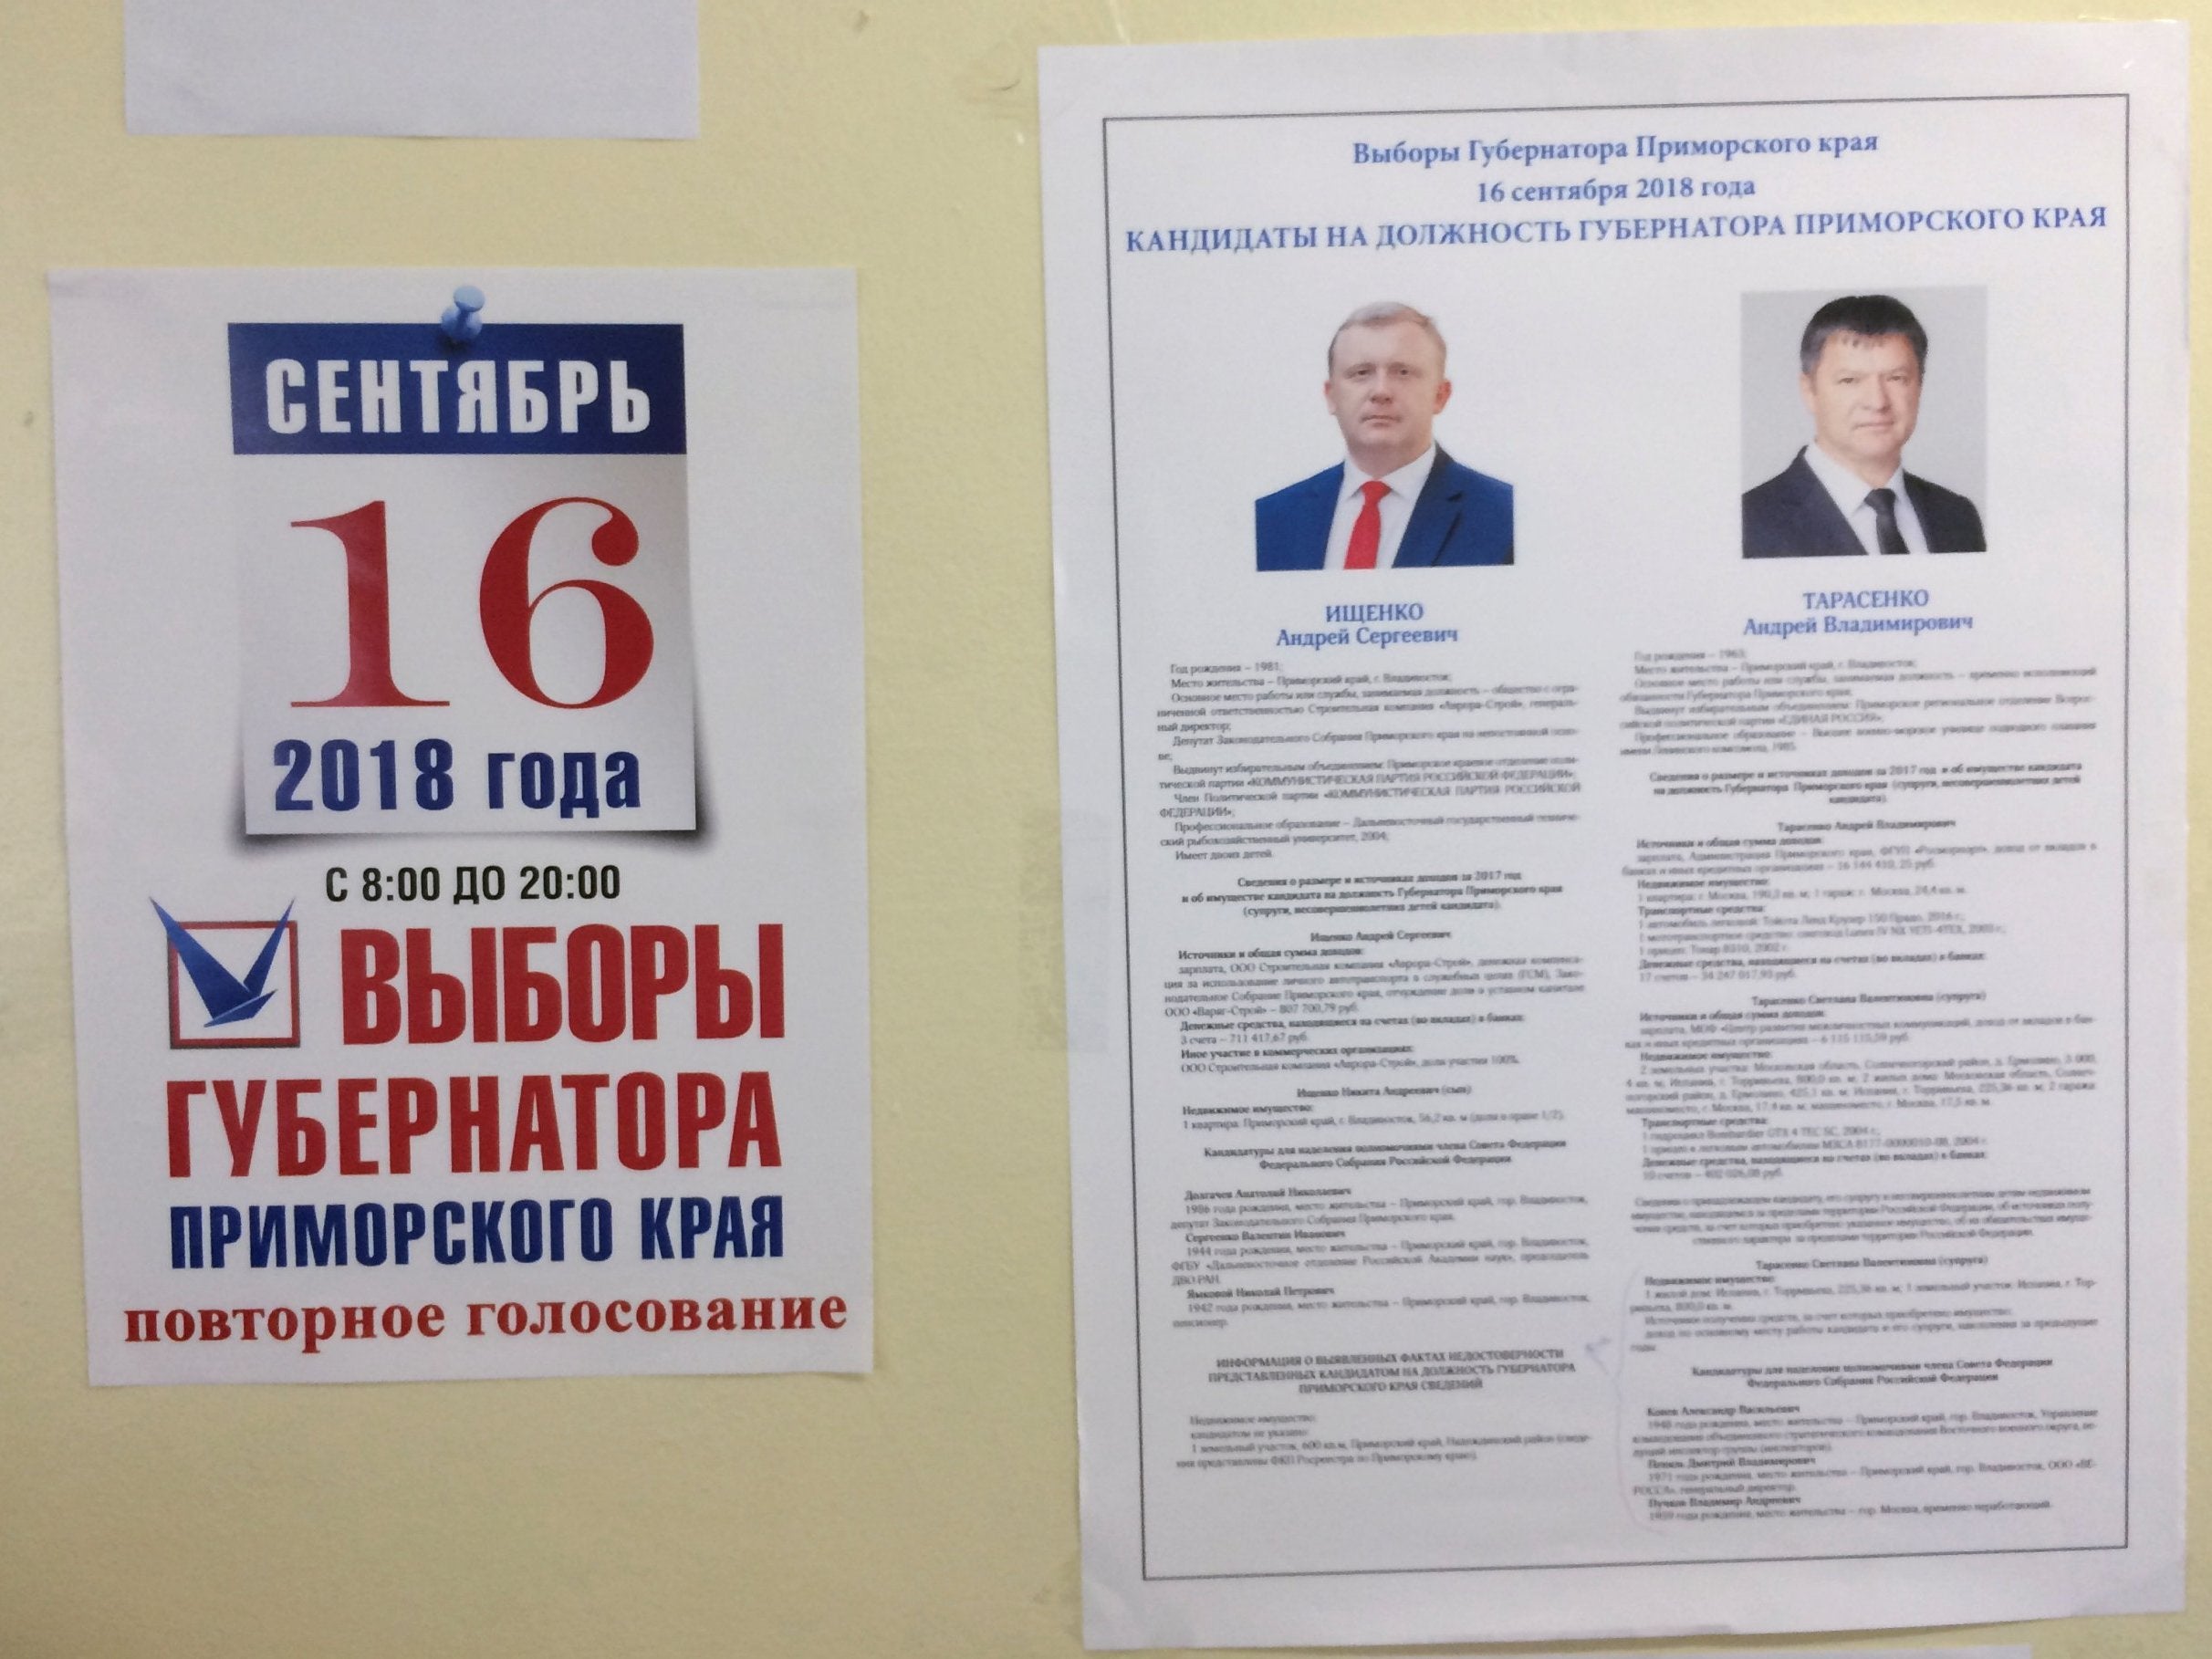 A view shows a broadsheet with information about gubernatorial candidates Andrei Ischenko (L) and Andrei Tarasenko at a polling station during the election for governor of Russia's Primorsky Region in the far eastern city of Vladivostok, Russia September 16